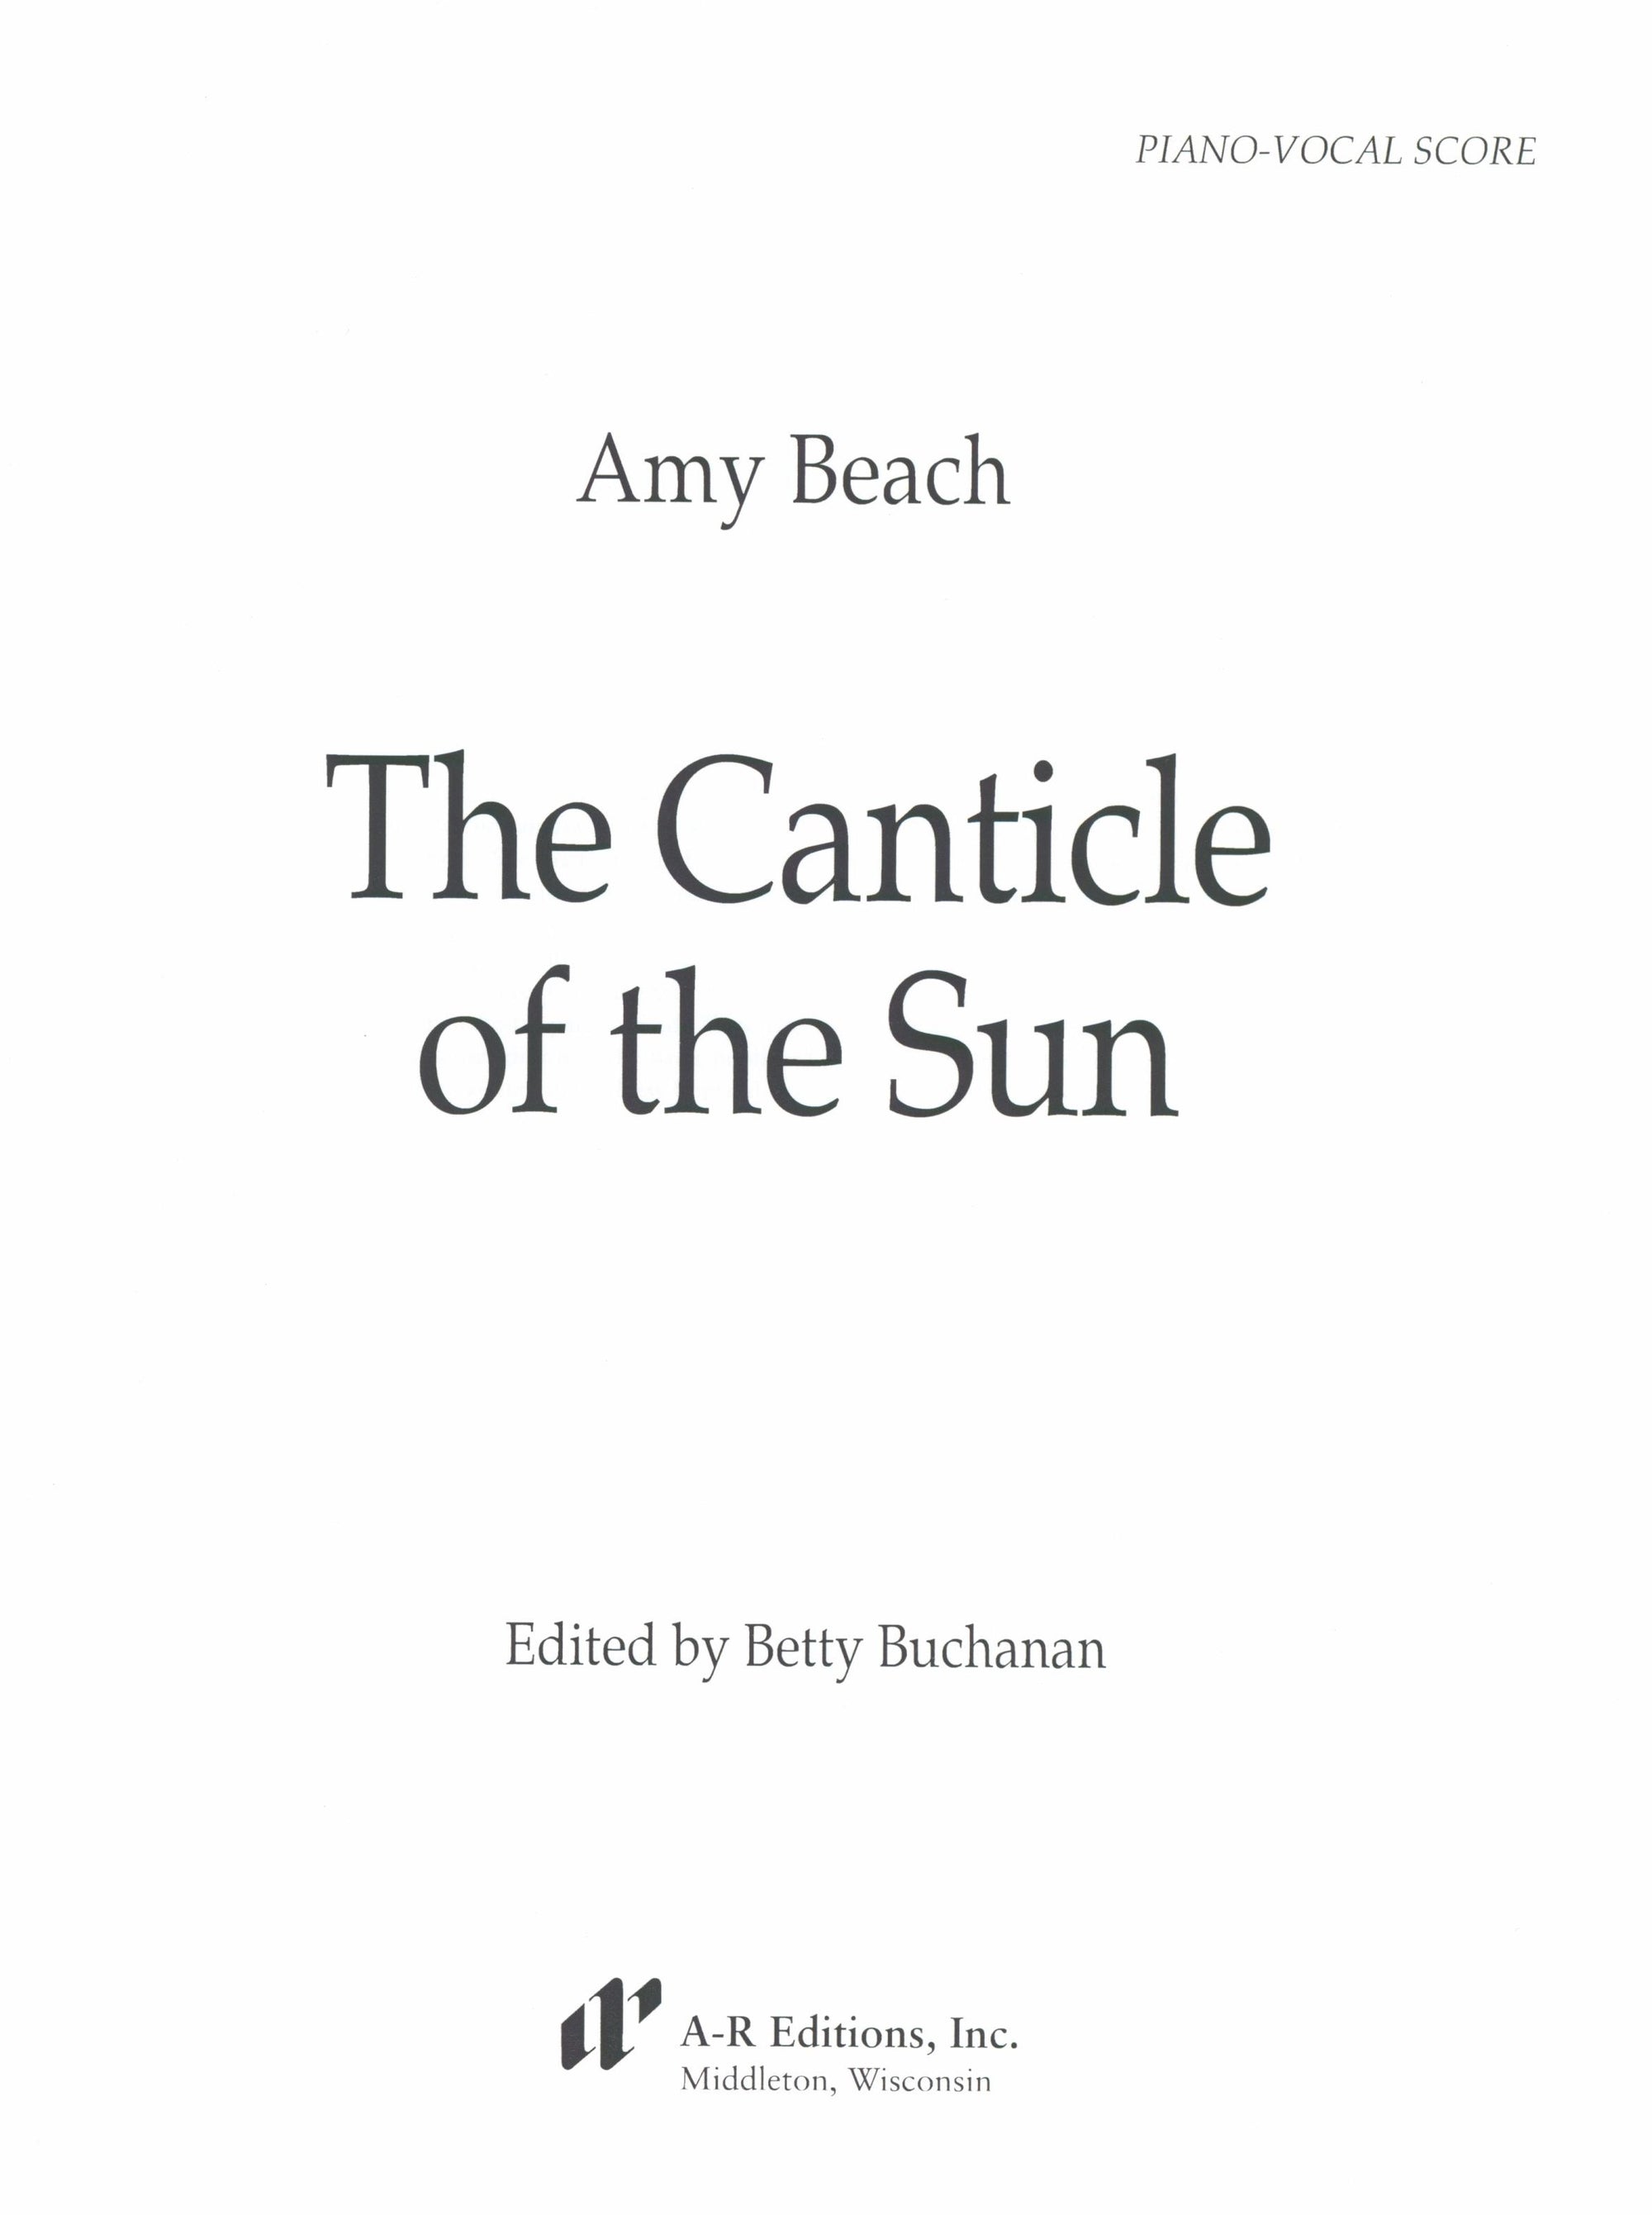 Beach: The Canticle of the Sun